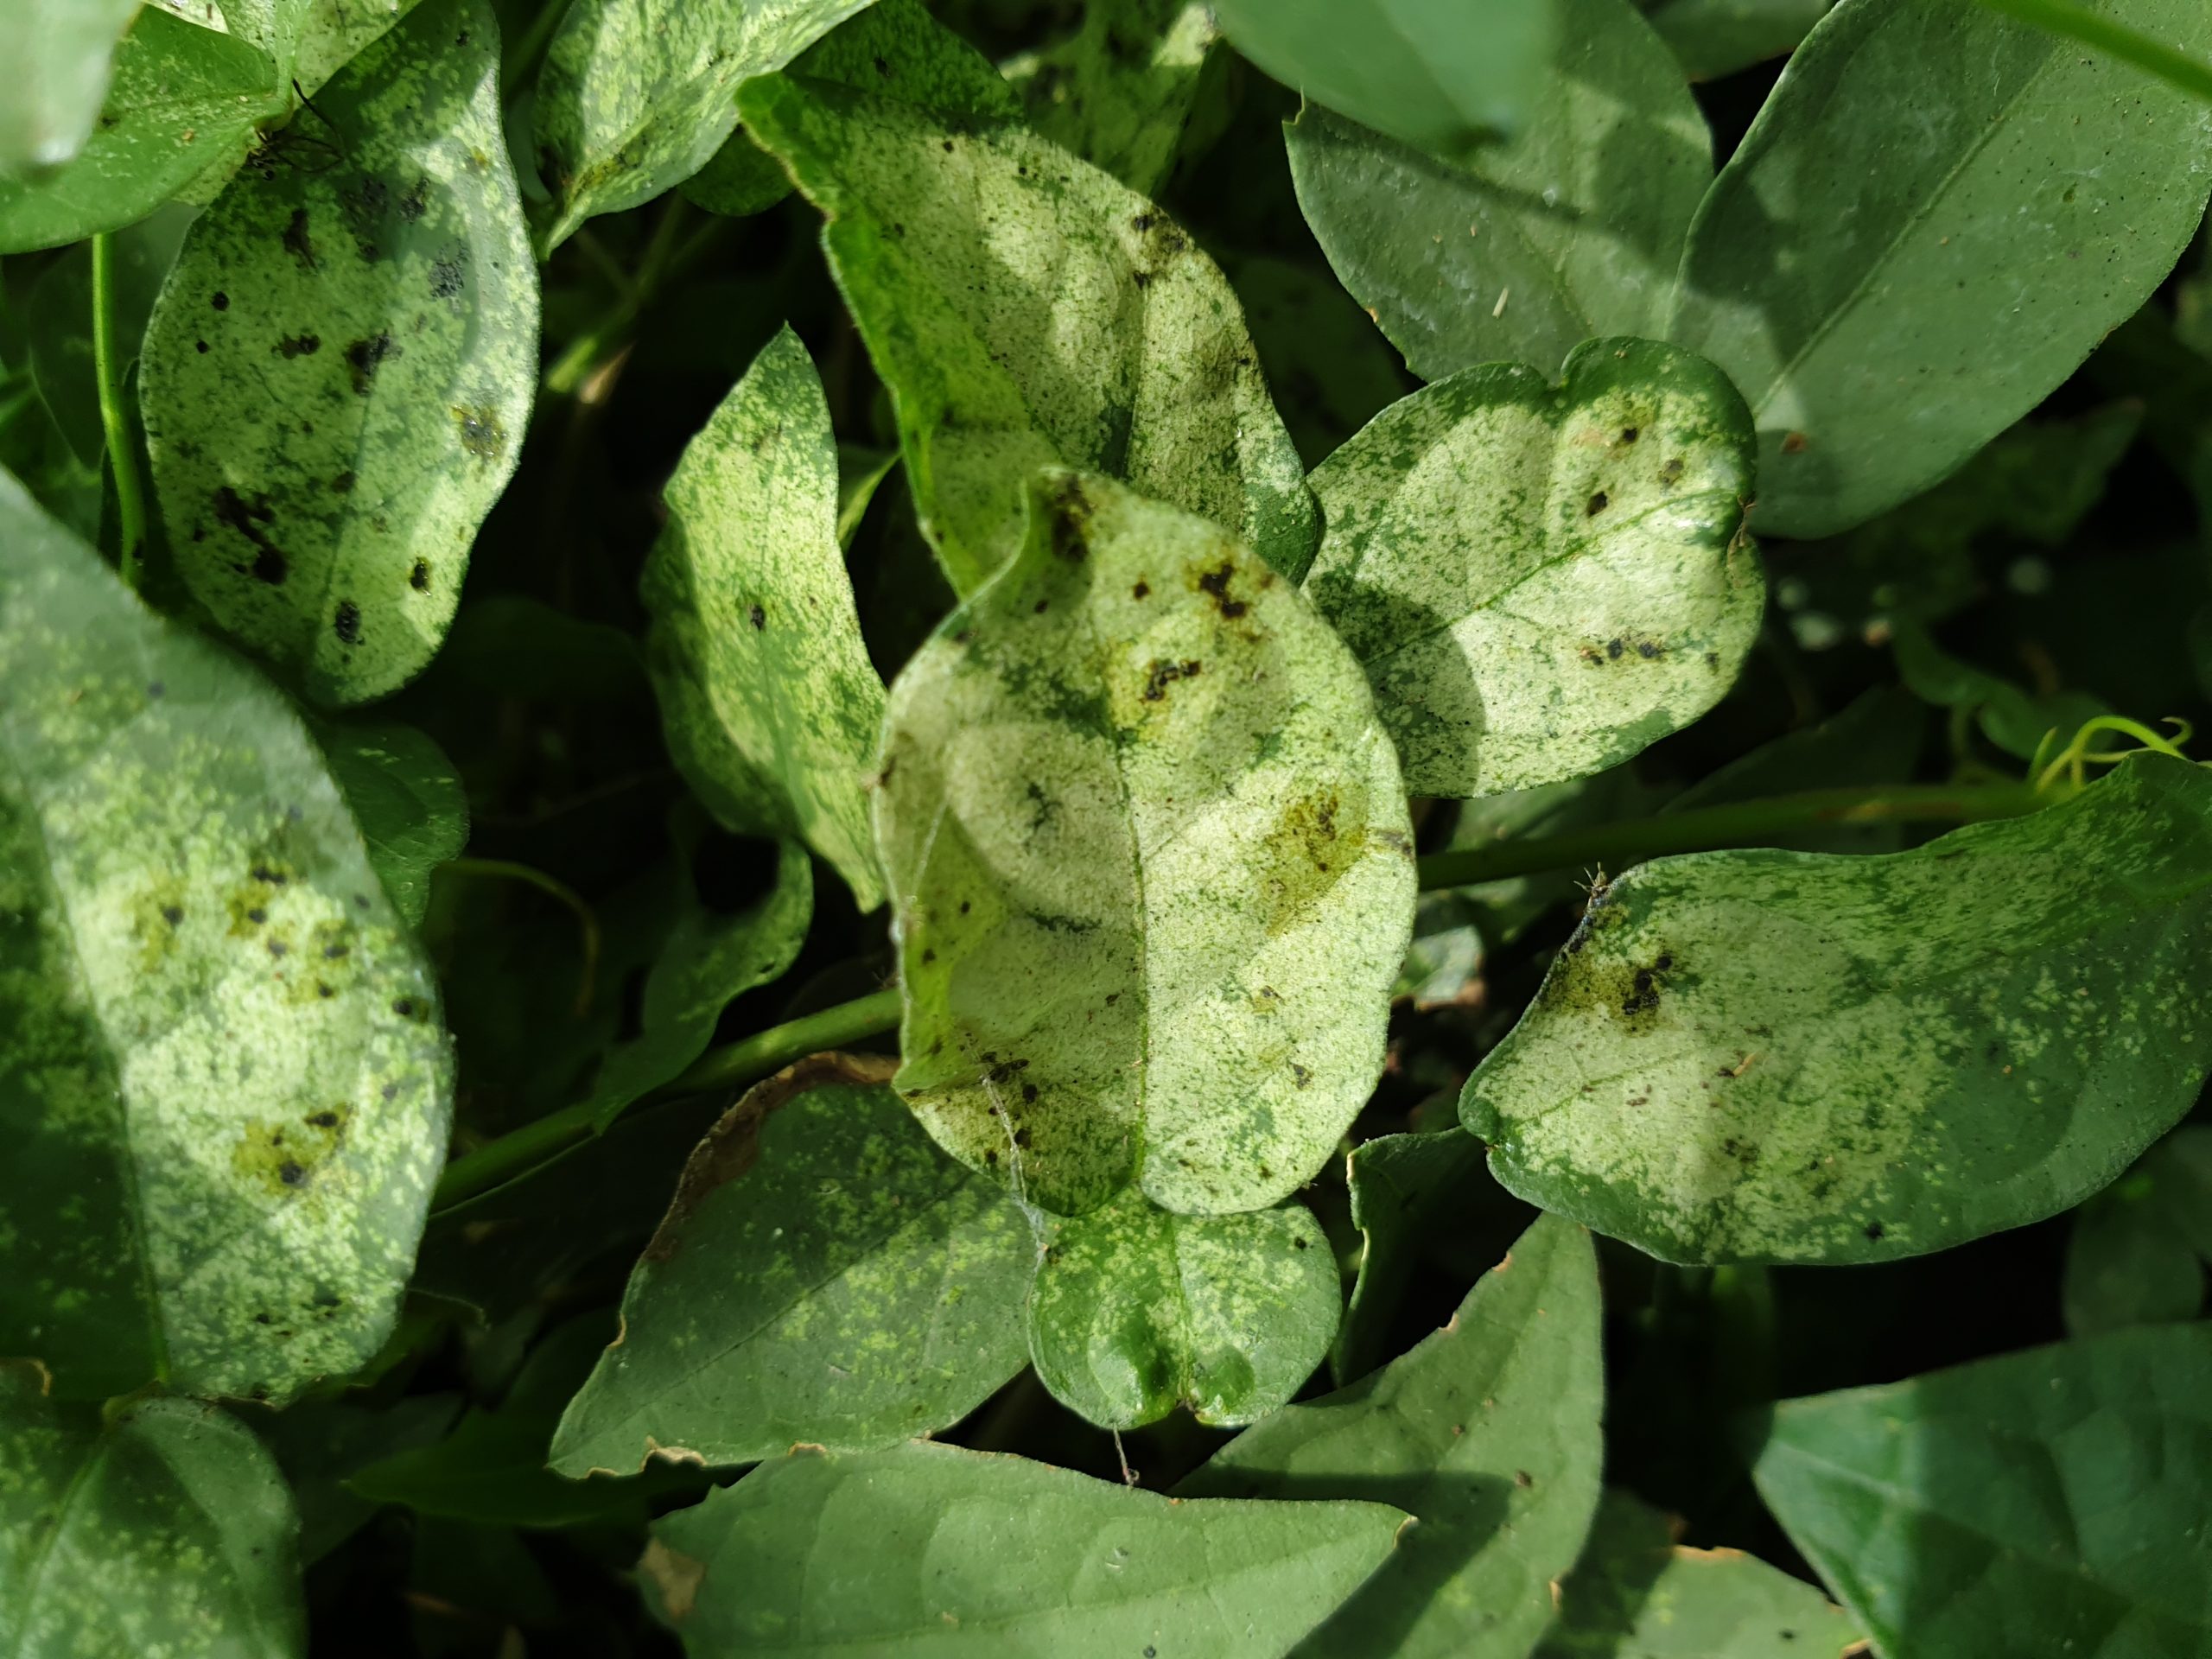 Tingid bugs causing the characteristic white speckling on the leaves of Cats Claw Creeper vine.